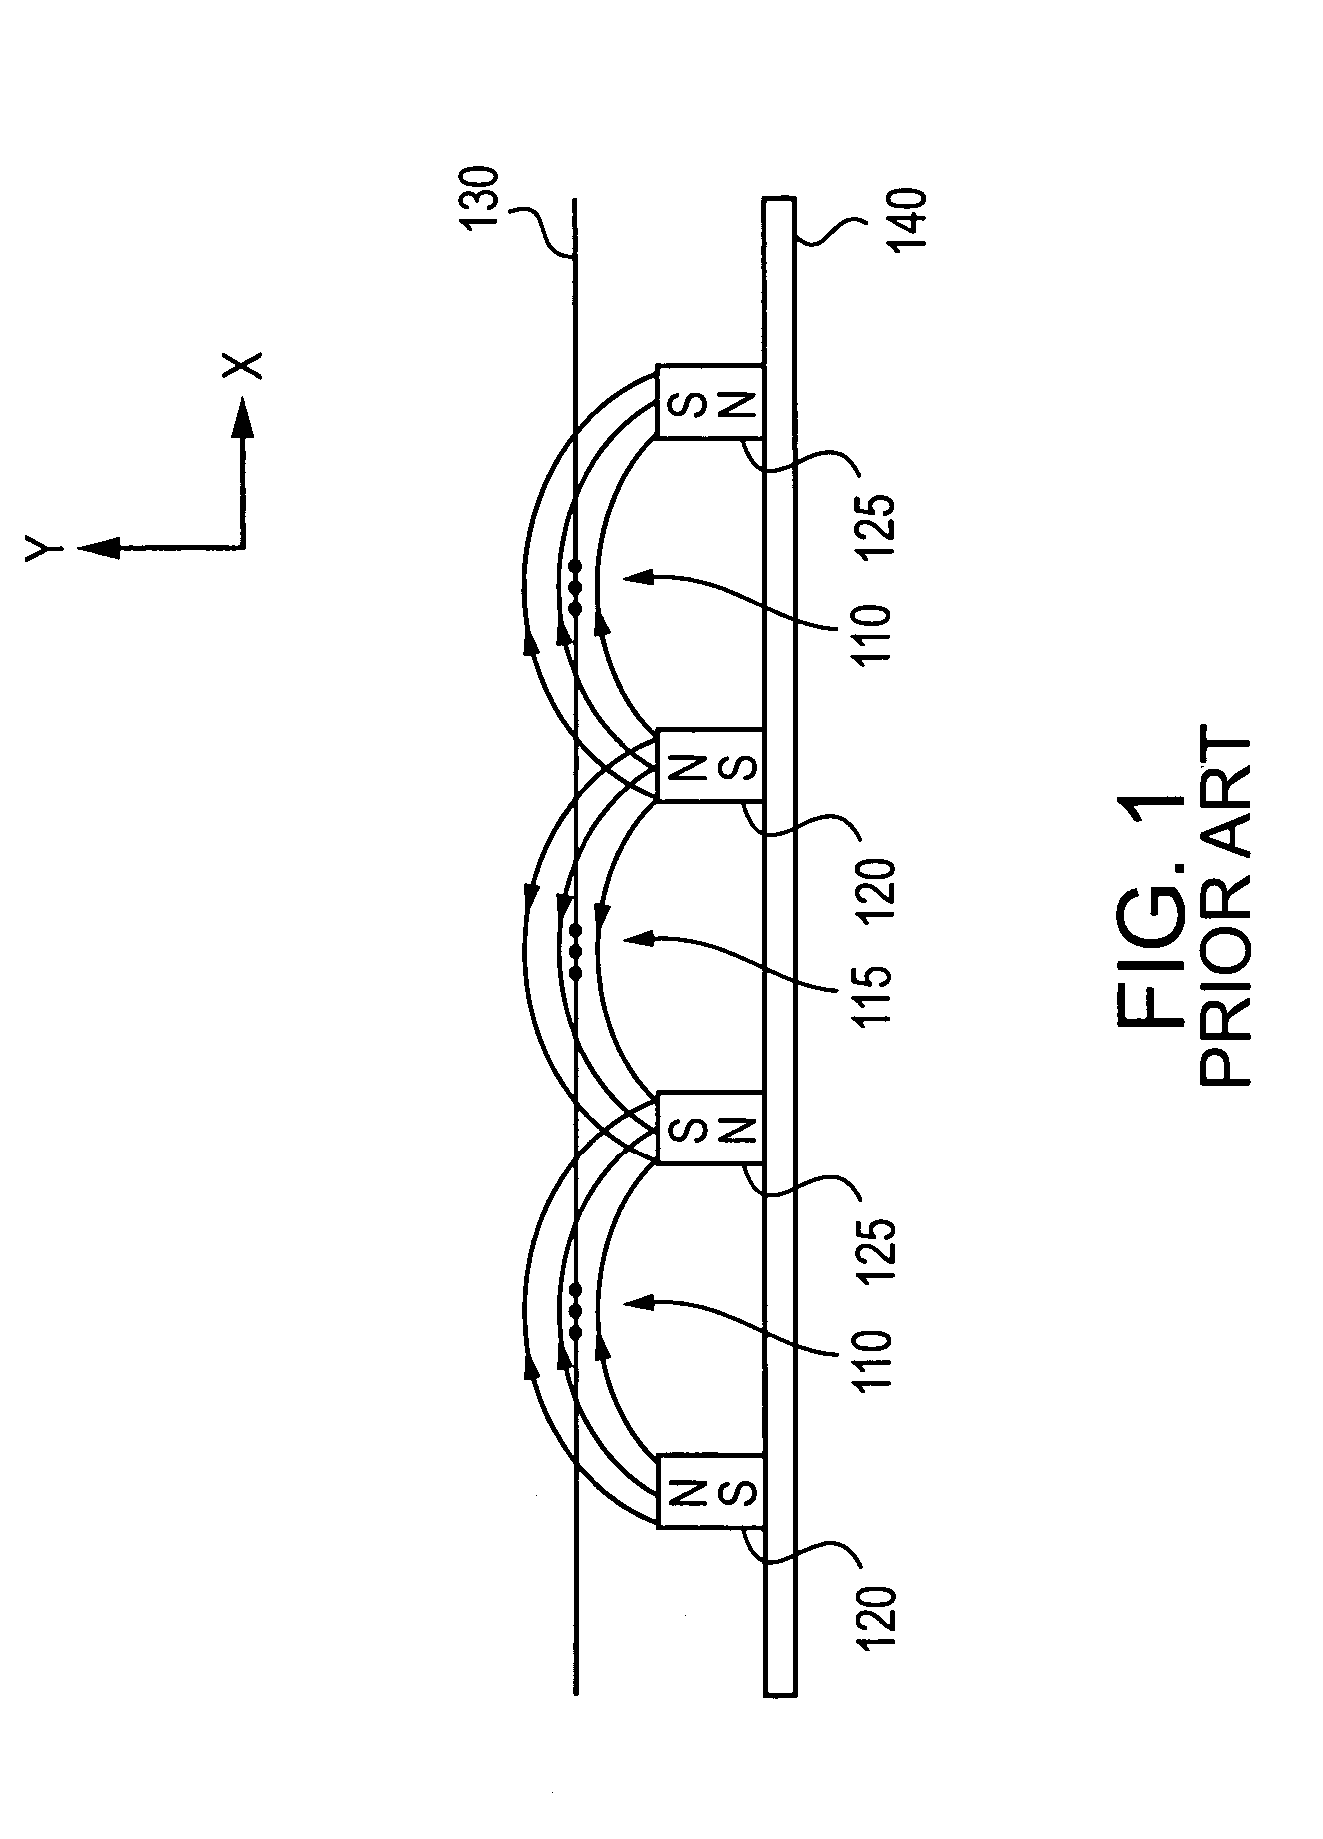 Acoustic transducer with mechanical balancing